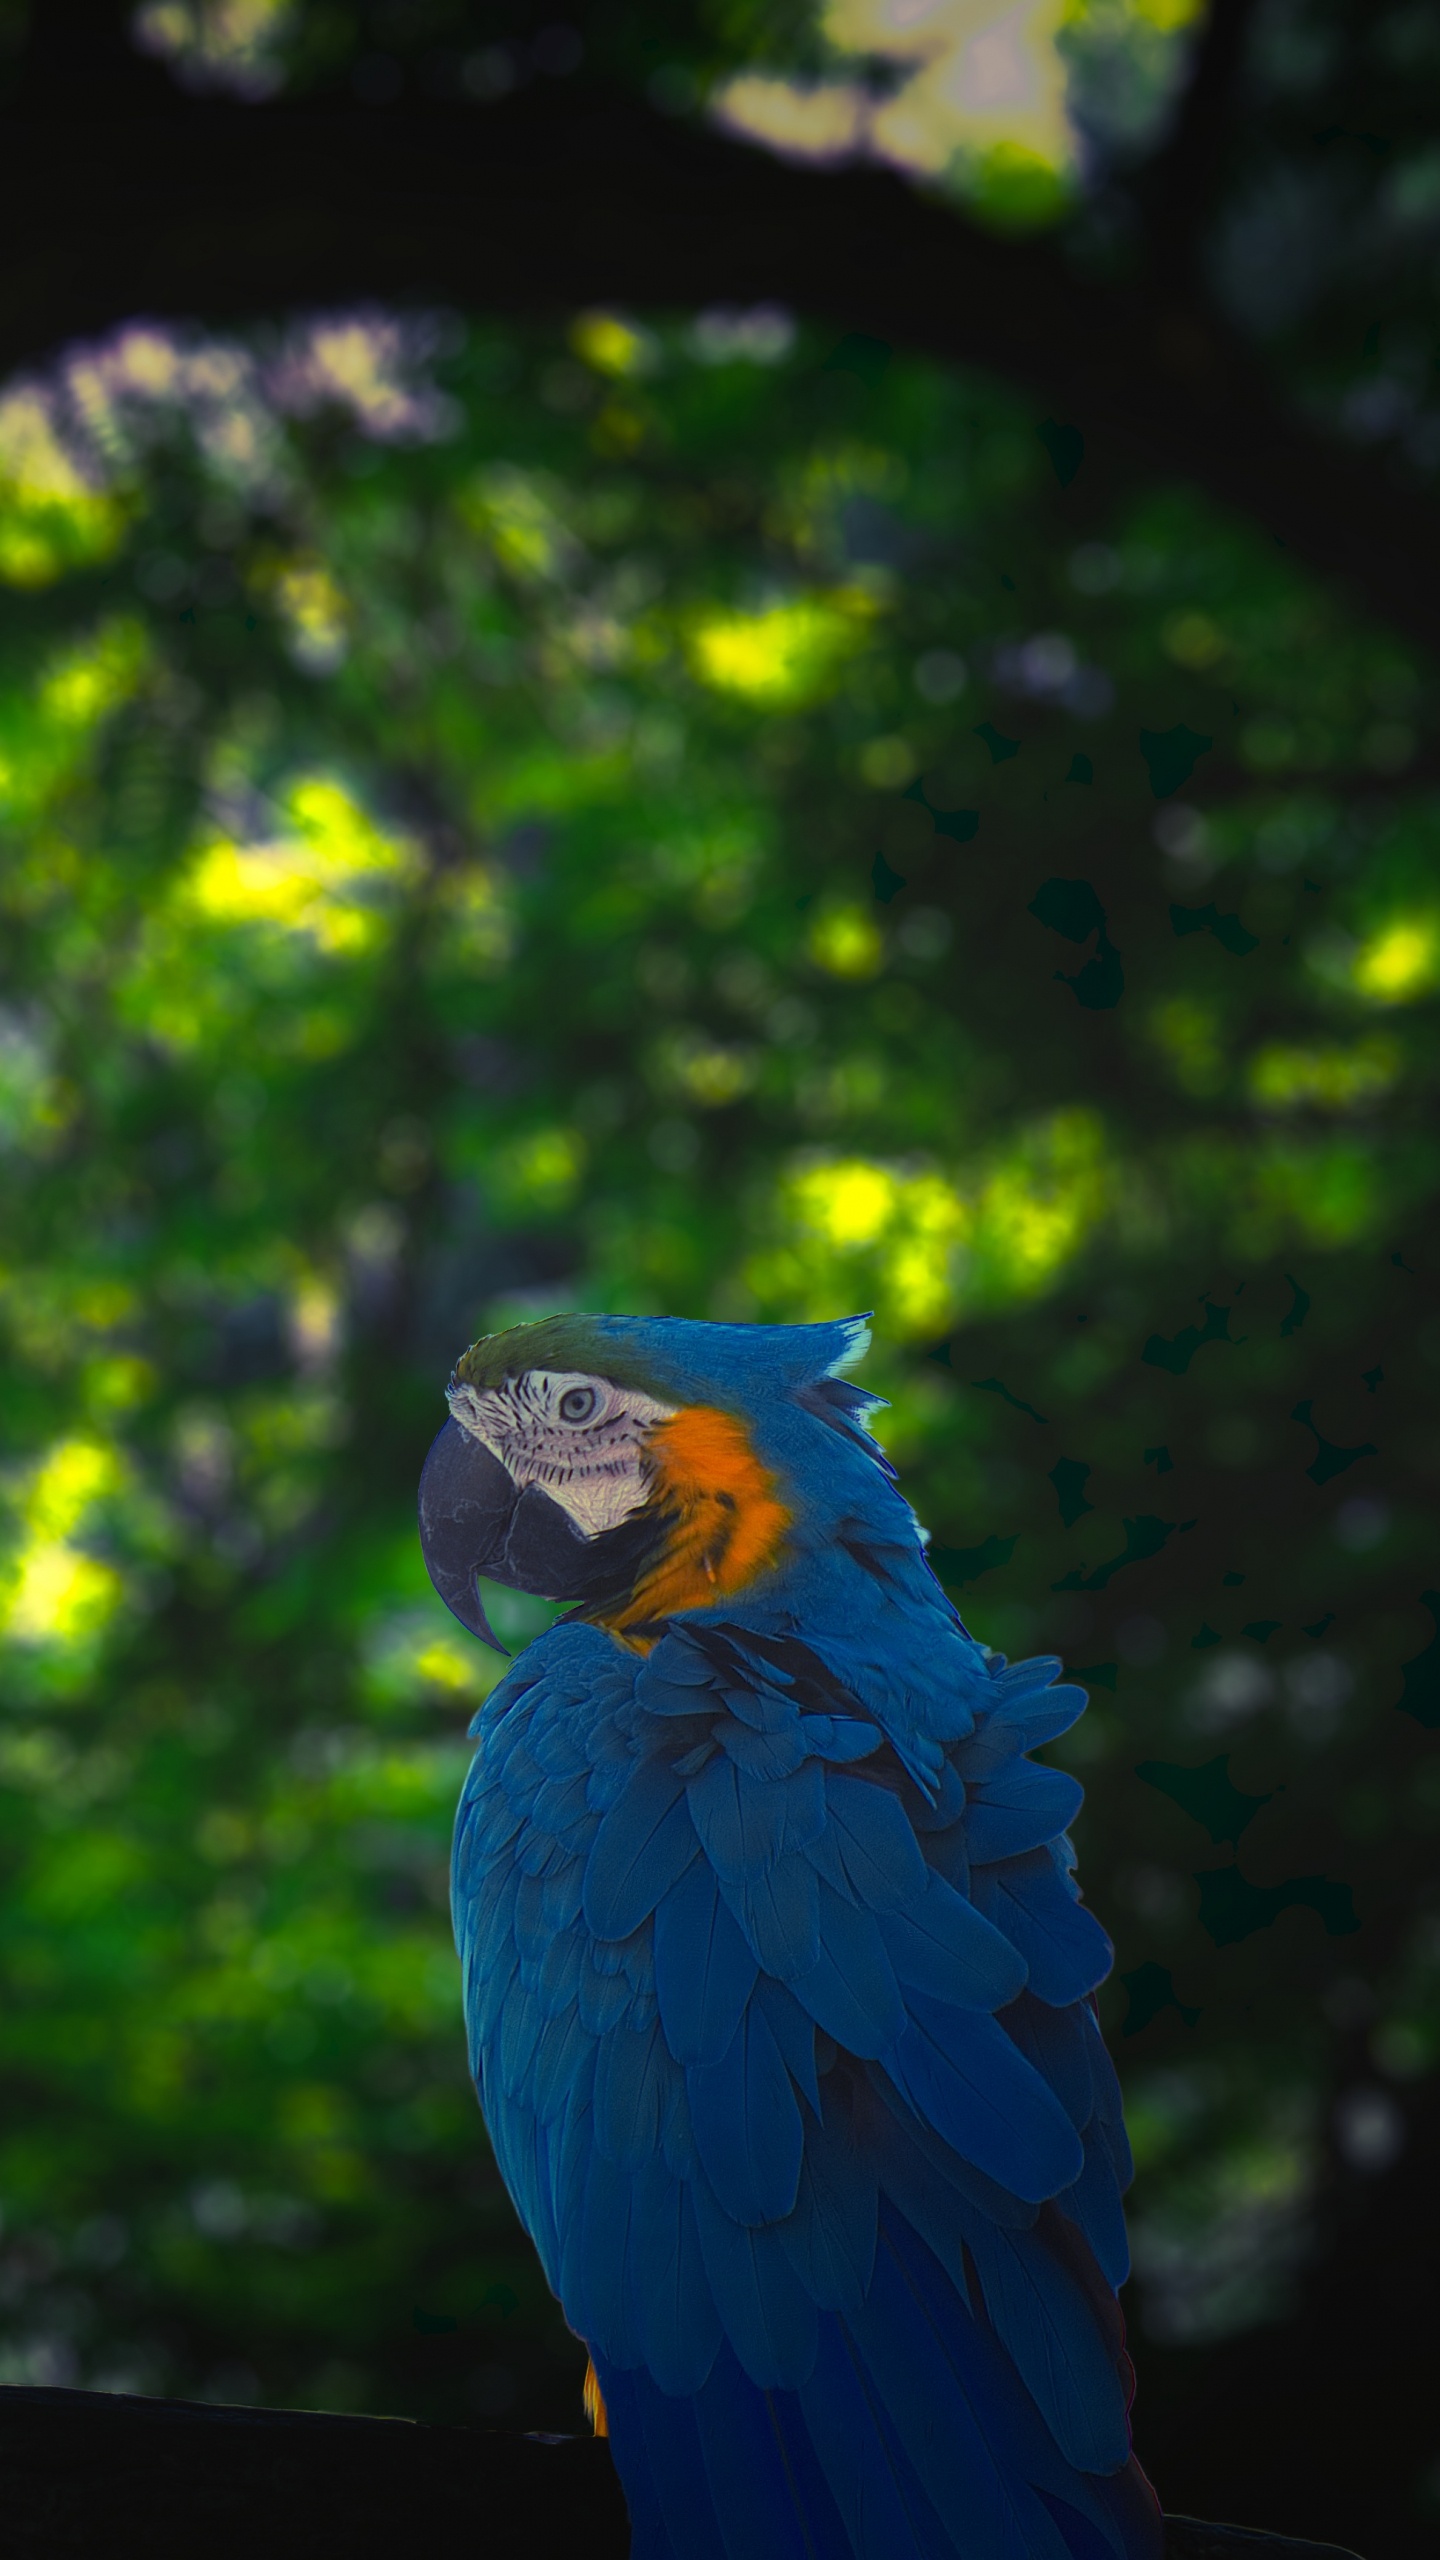 Blue and Yellow Macaw on Black Wooden Fence During Daytime. Wallpaper in 1440x2560 Resolution